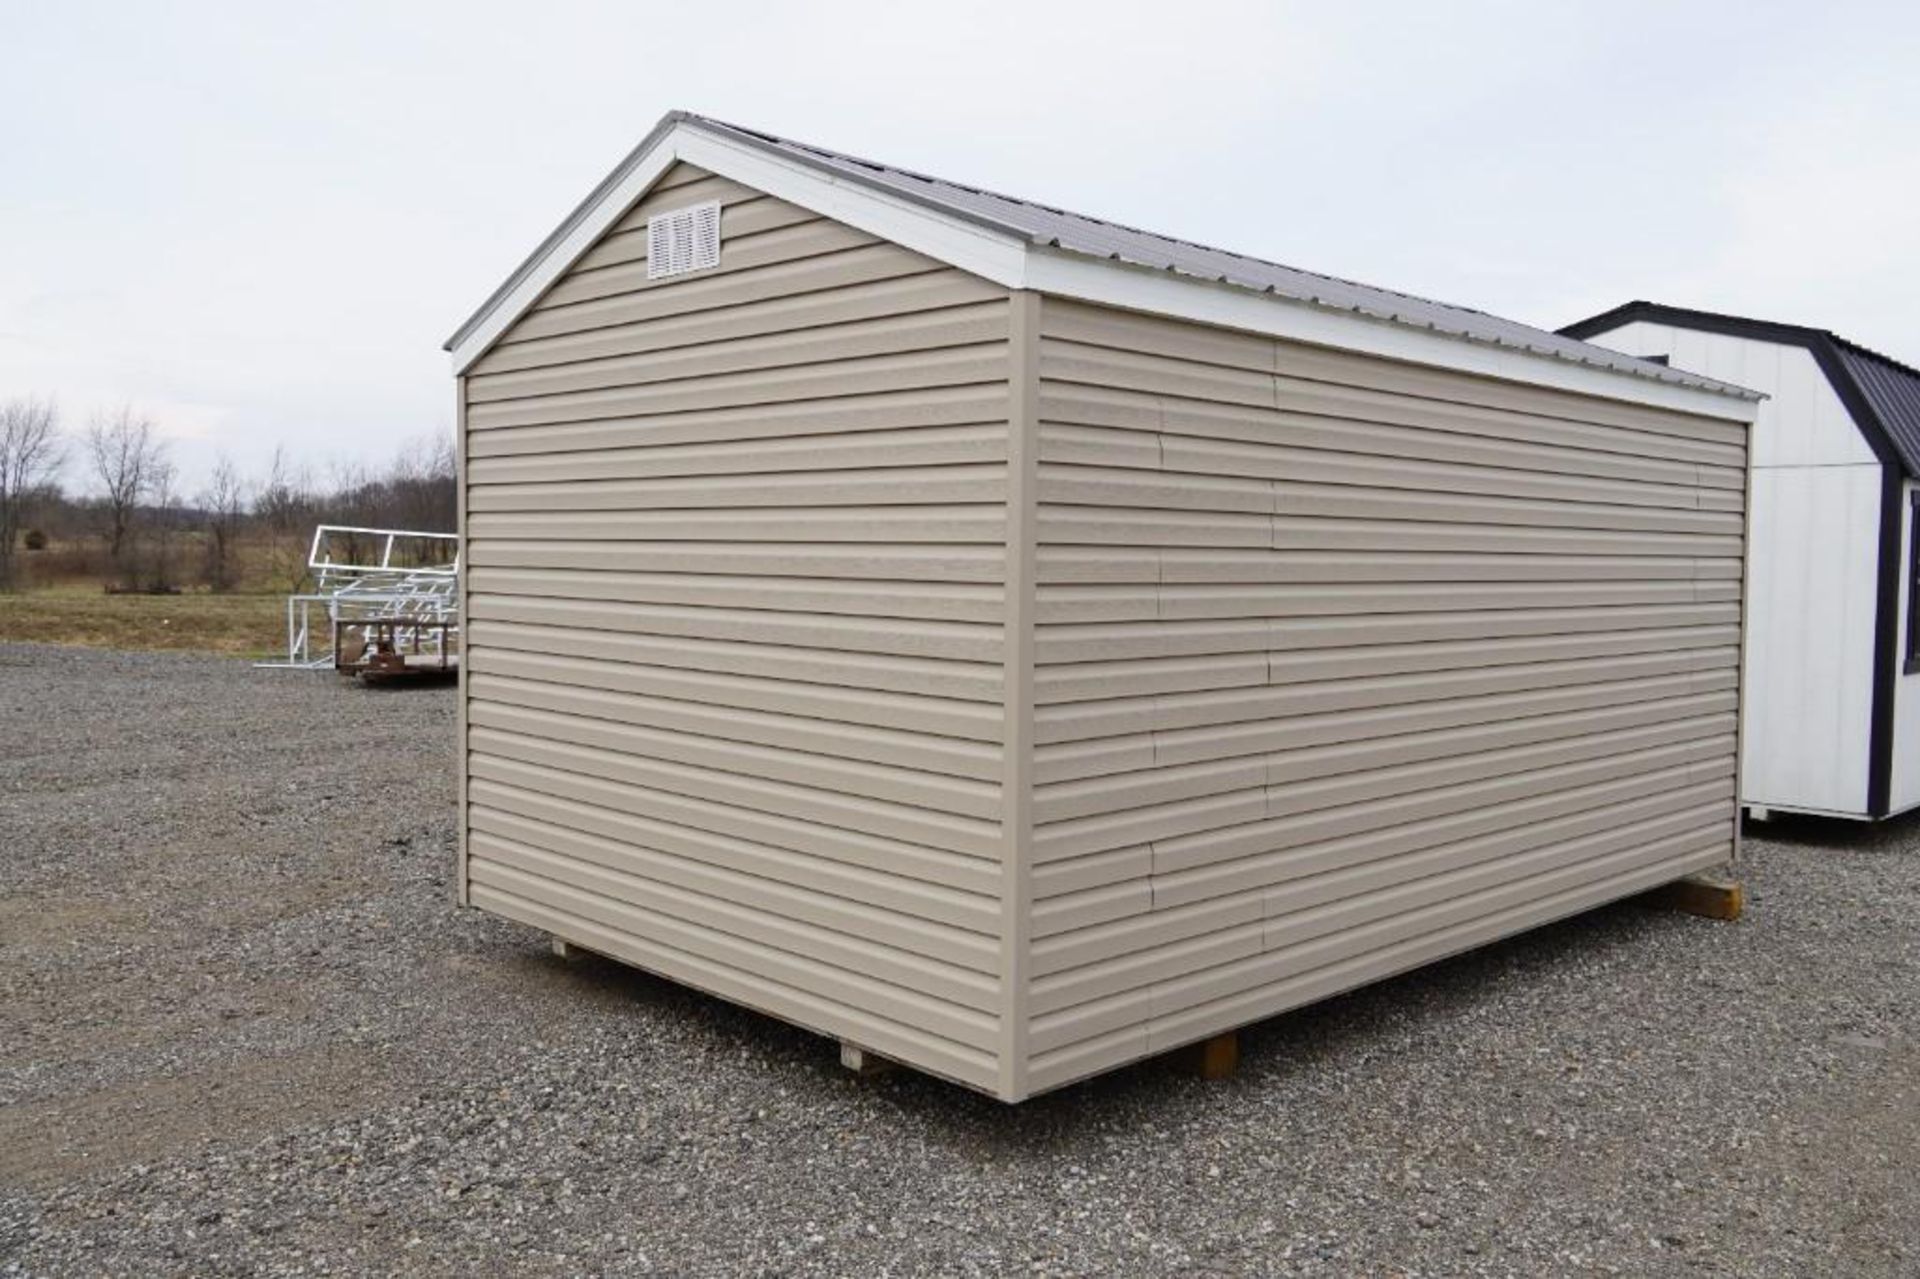 New 10' x 16' Vinyl Shed - Image 4 of 8